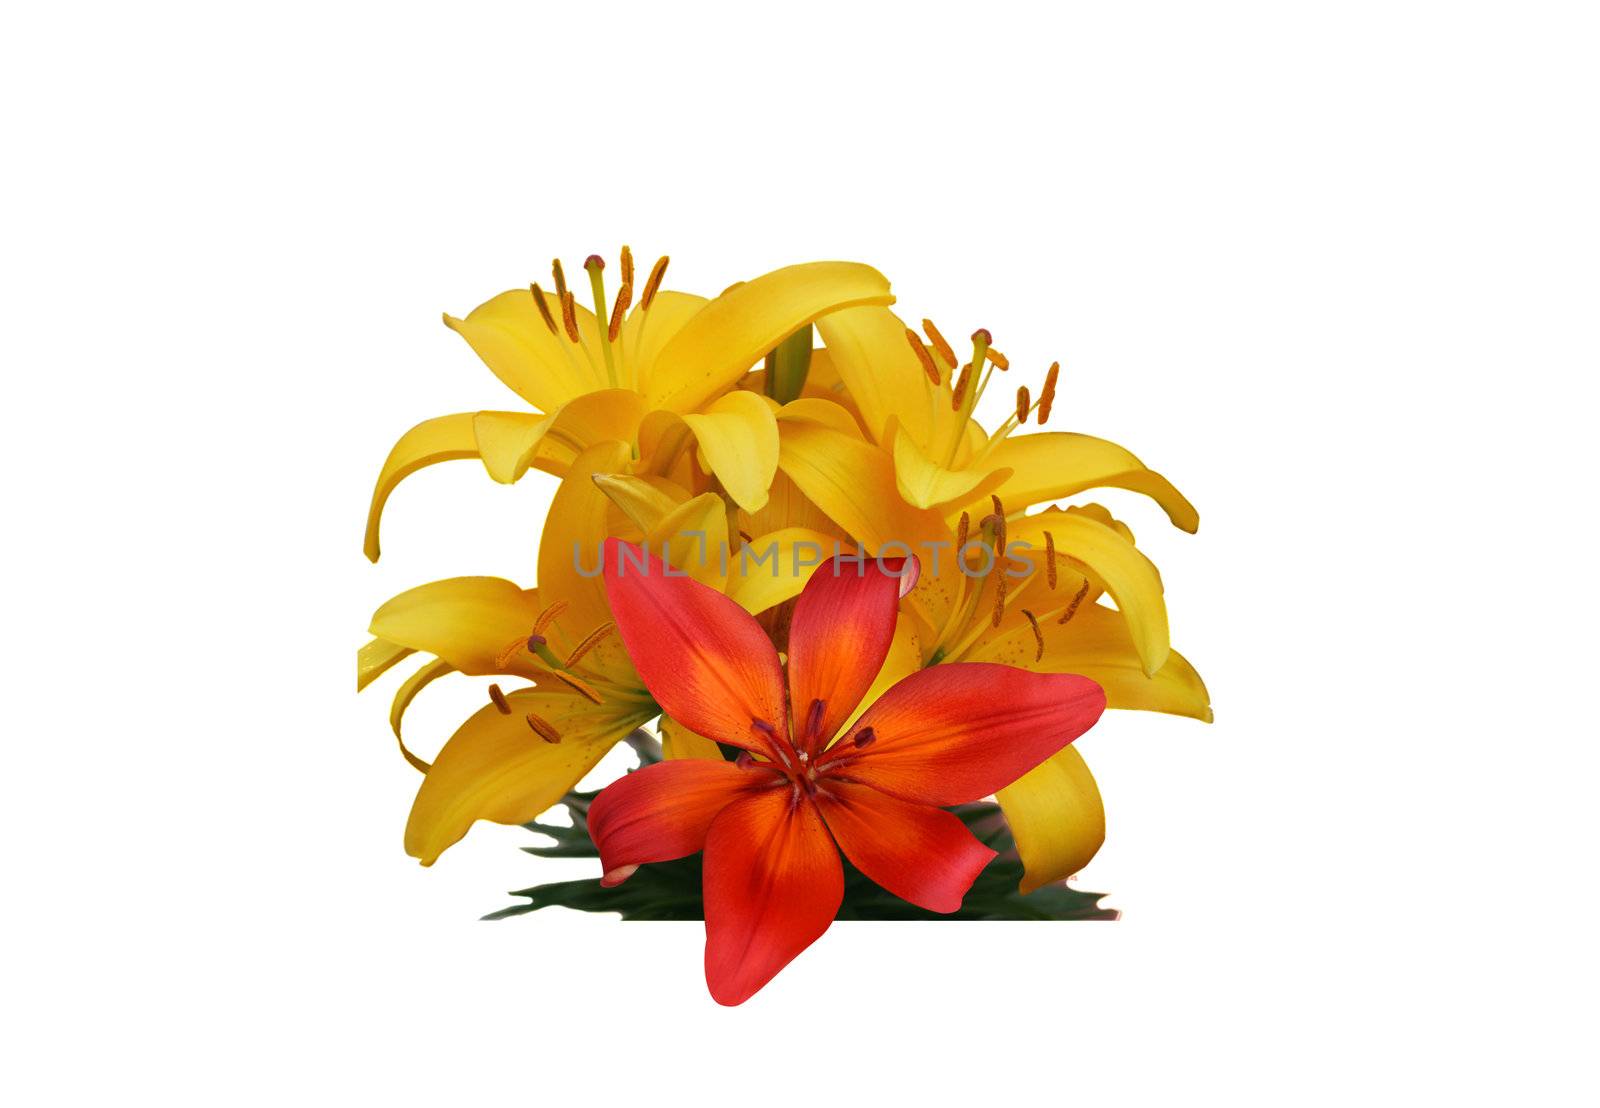 Nice picture with yellow and red flowers on the white background